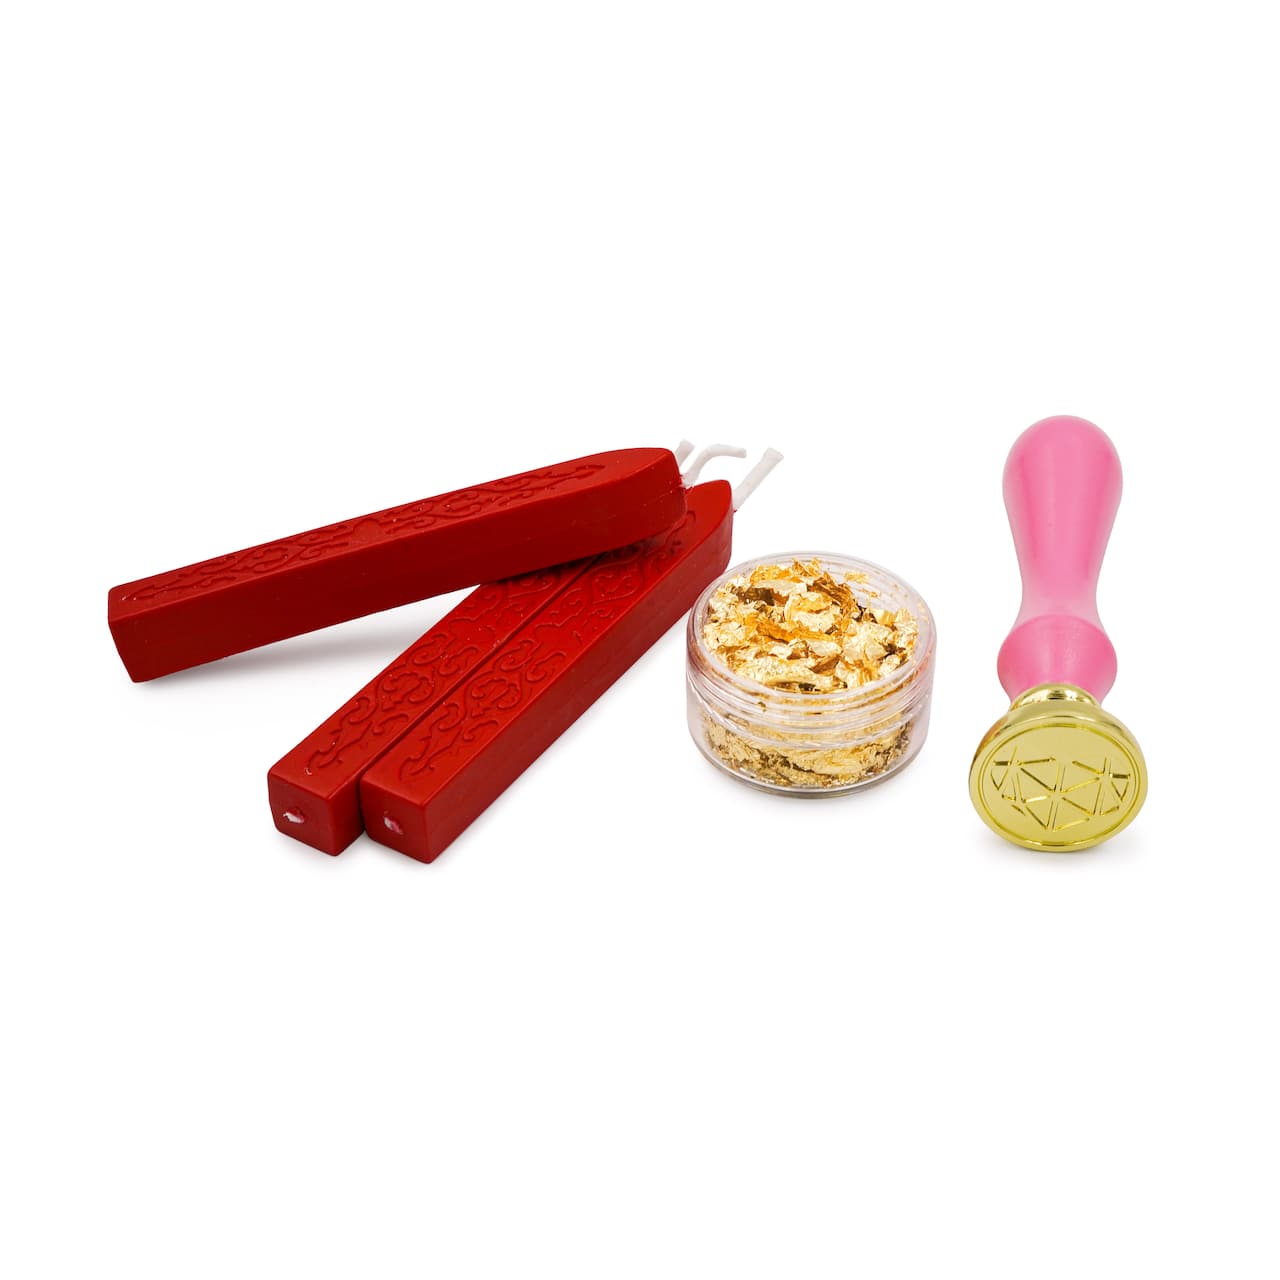 Geometric Heart Sealing Wax Kit by Recollections | Michaels